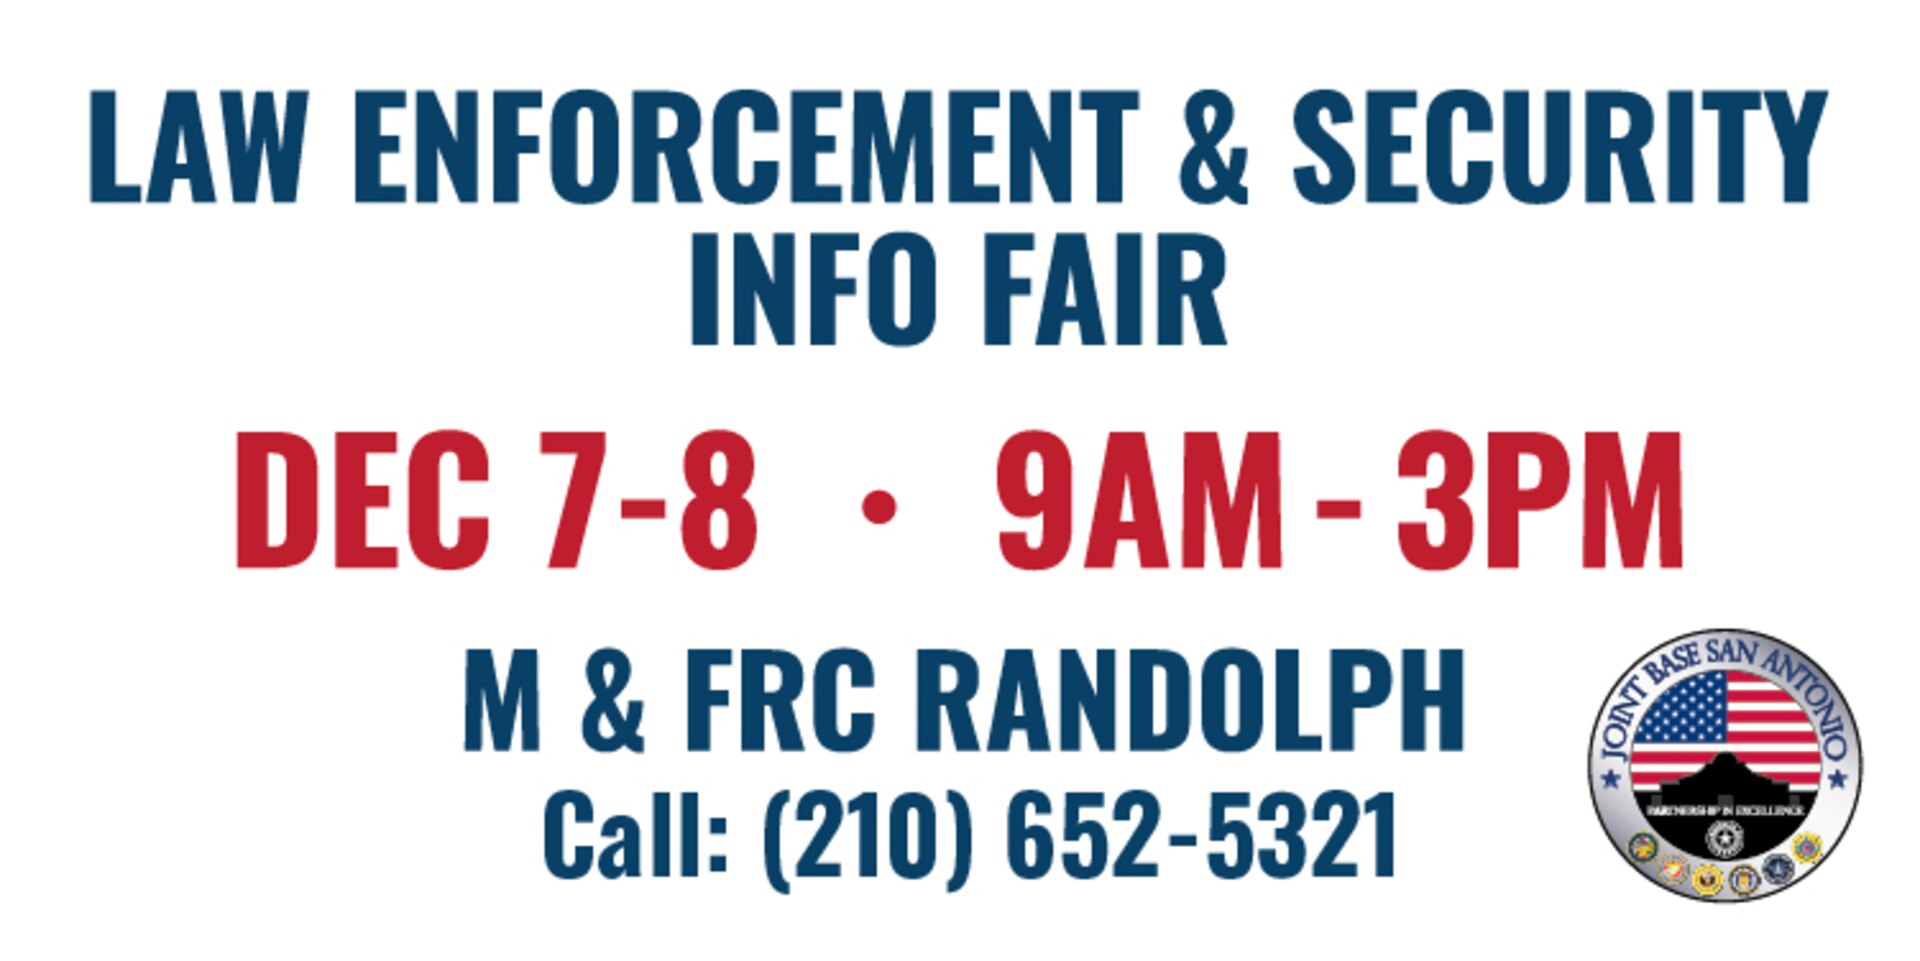 The Joint Base San Antonio-Randolph Military and Family Readiness Center hosts a Law Enforcement & Security Info Fair from 9 a.m. to 3 p.m. Dec. 7-8